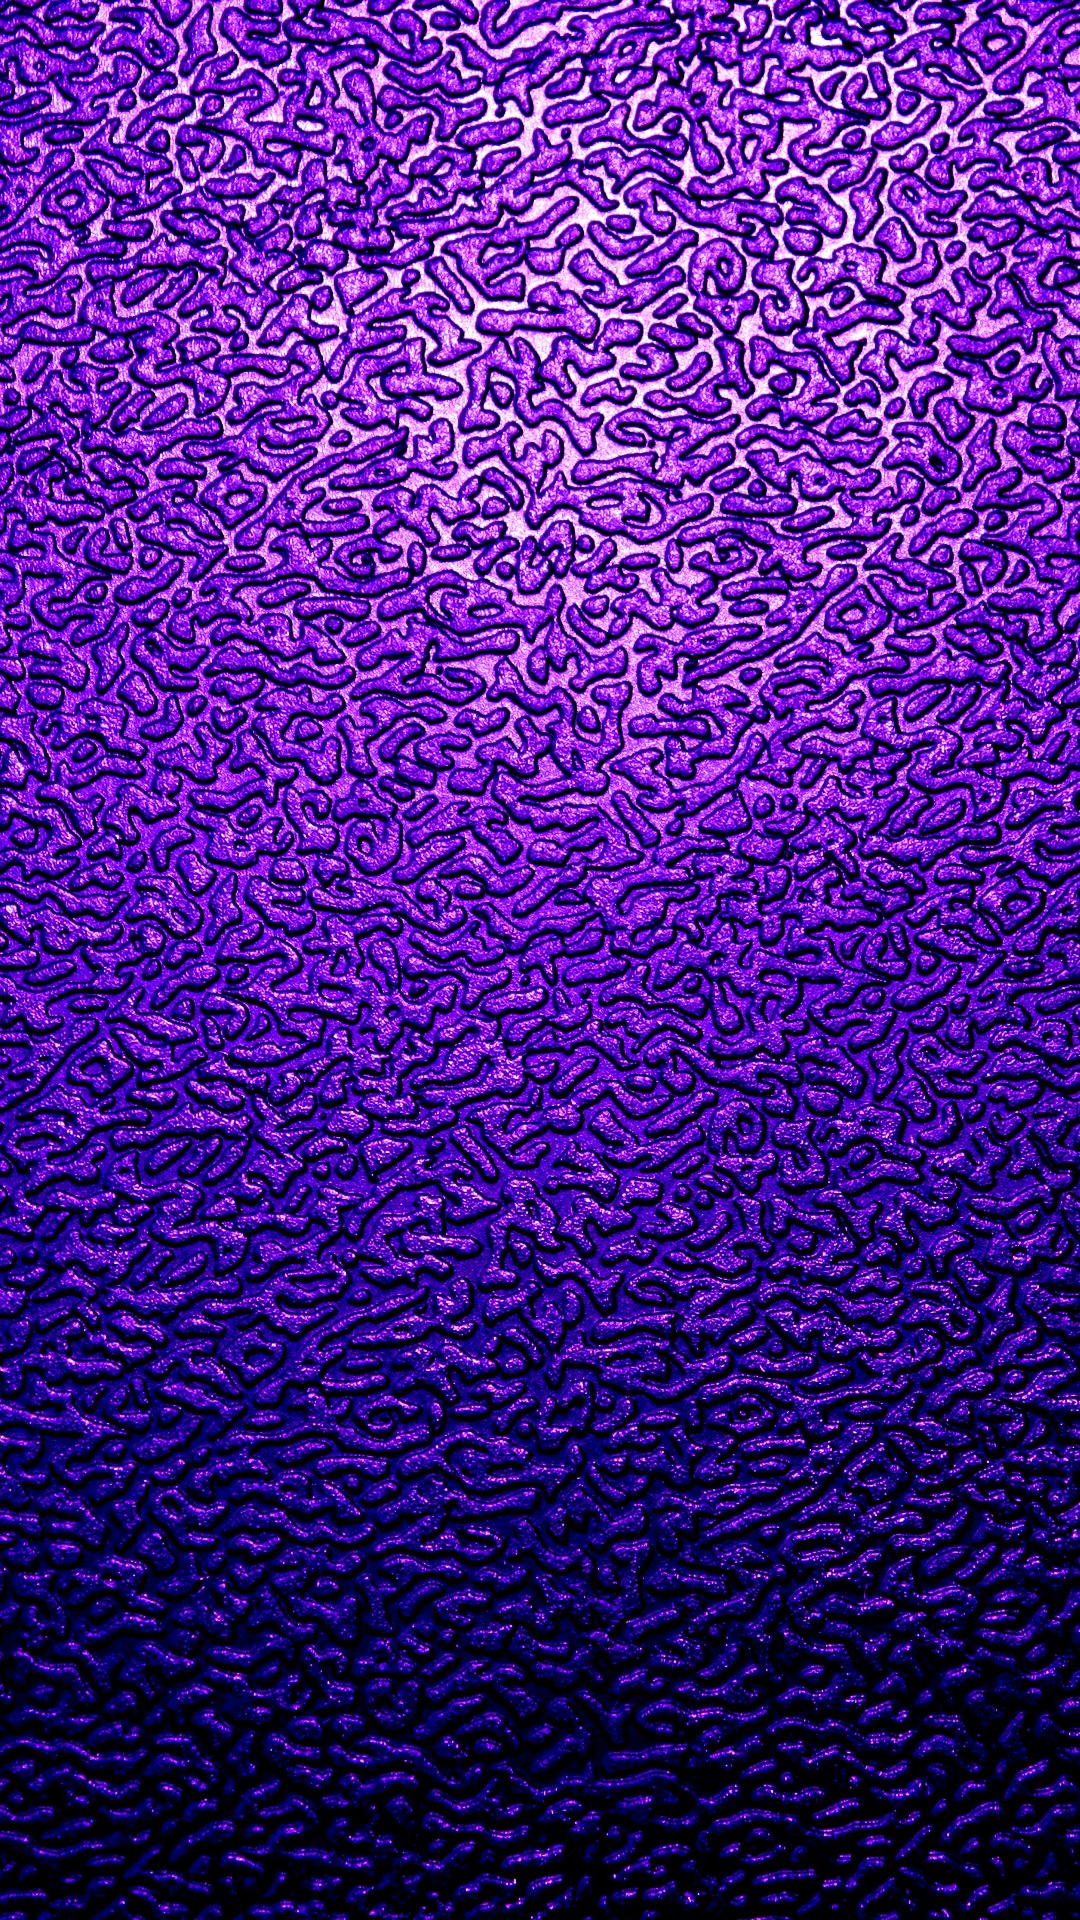 Wallpaper Android Cool Purple with high-resolution 1080x1920 pixel. You can use this wallpaper for your Android backgrounds, Tablet, Samsung Screensavers, Mobile Phone Lock Screen and another Smartphones device